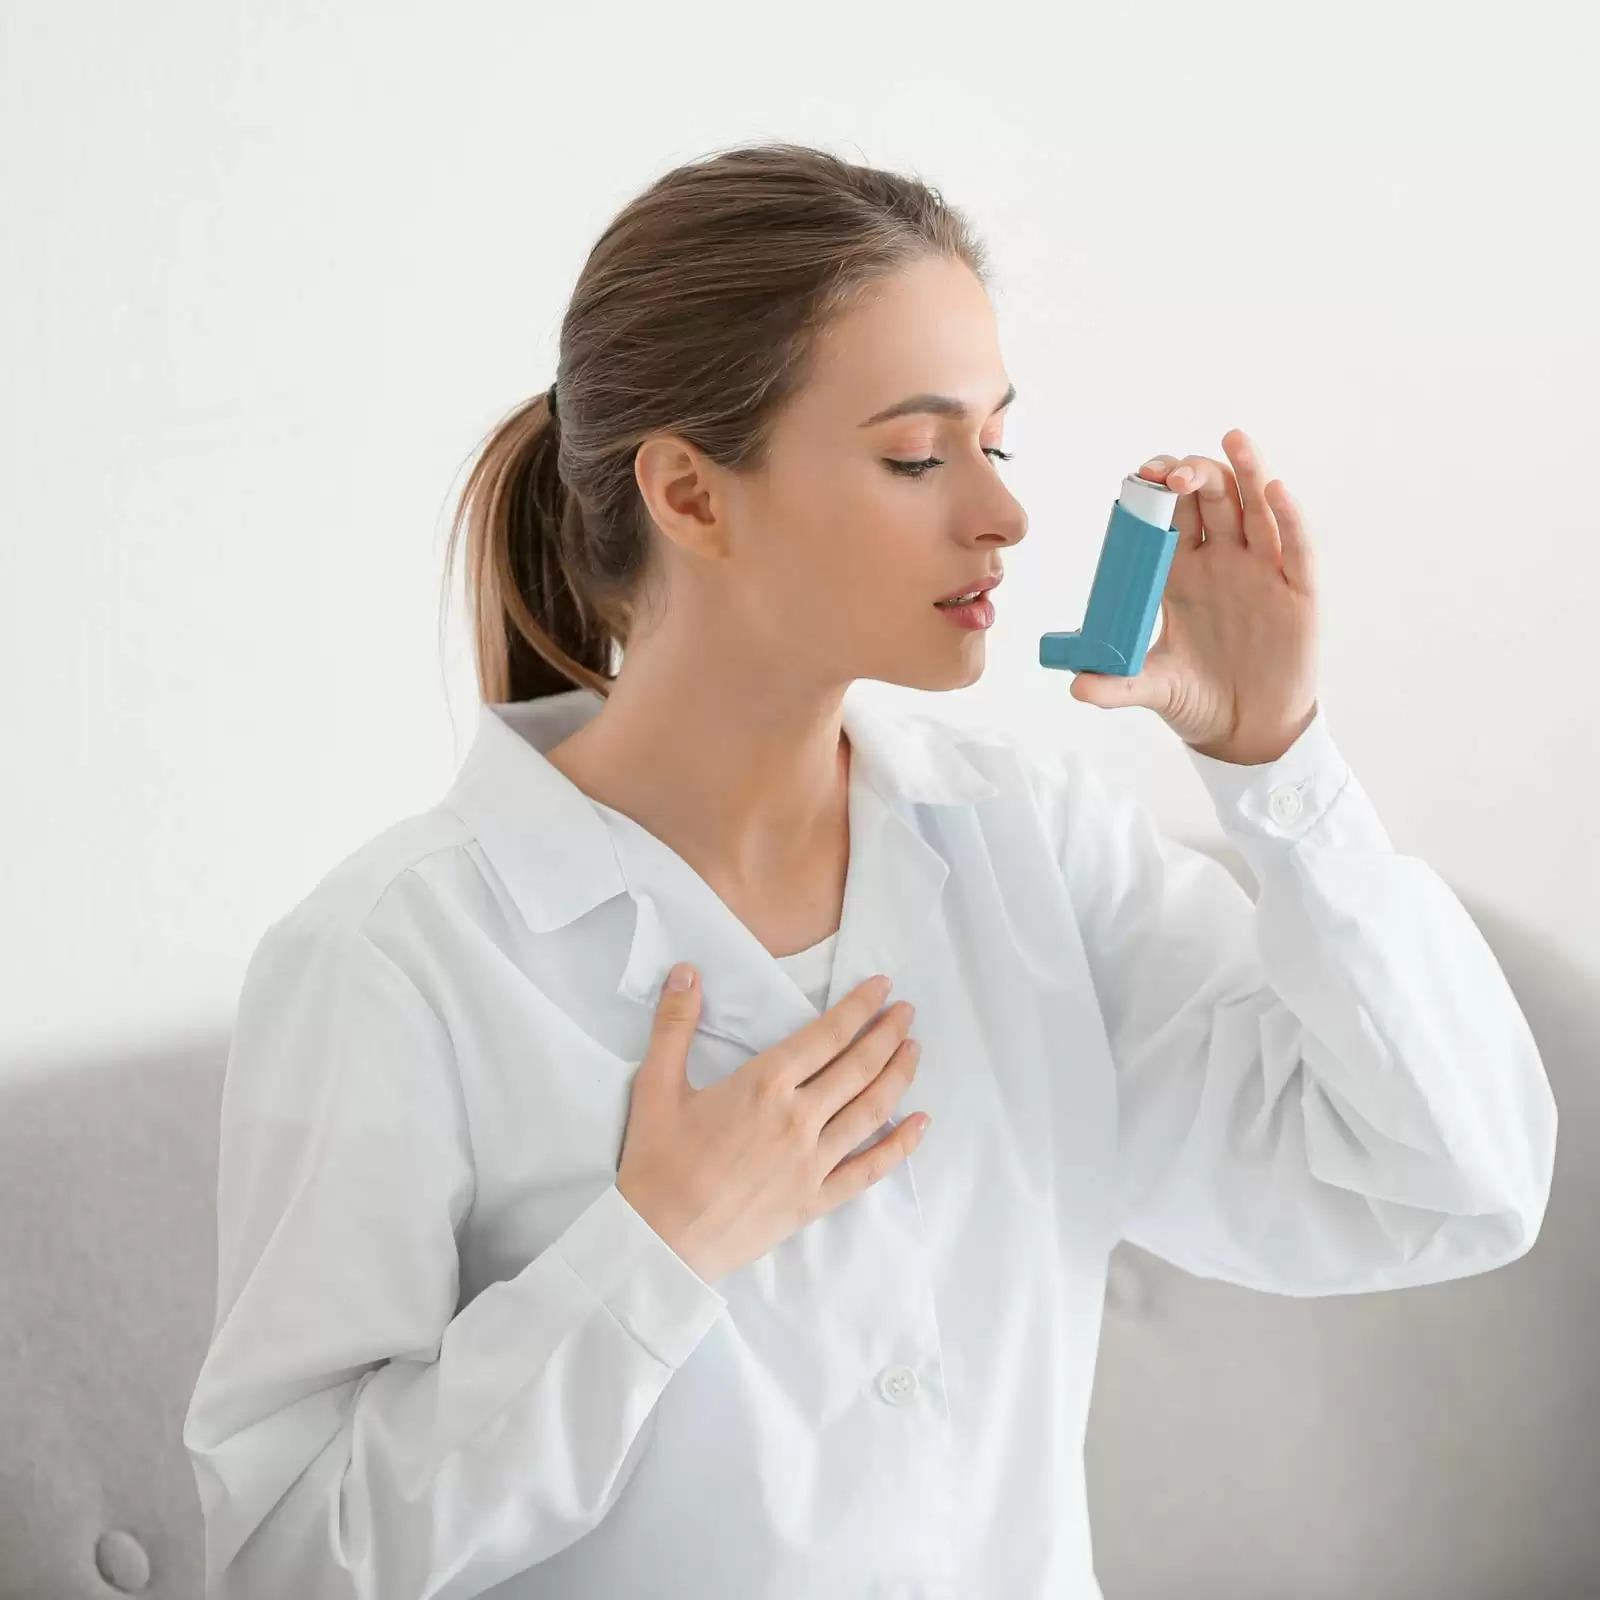 Summer Survival Guide: Breathe Easy with These Asthma Management Tips